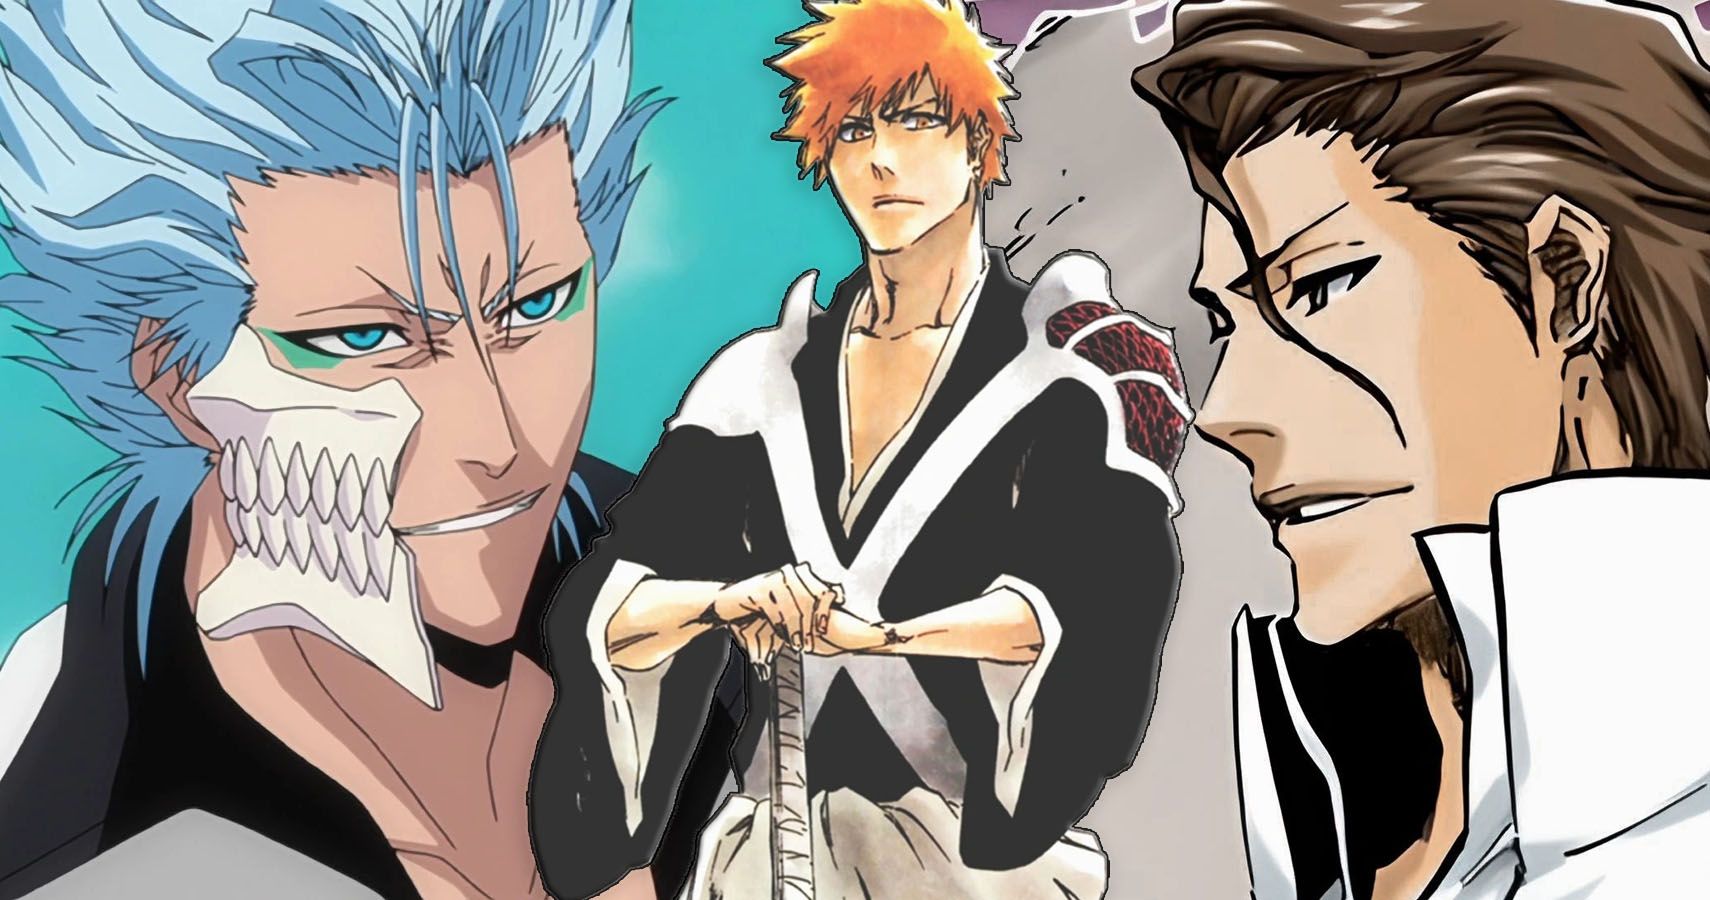 Ichigo from Bleach overlaid on top of Grimmjow and Aizen